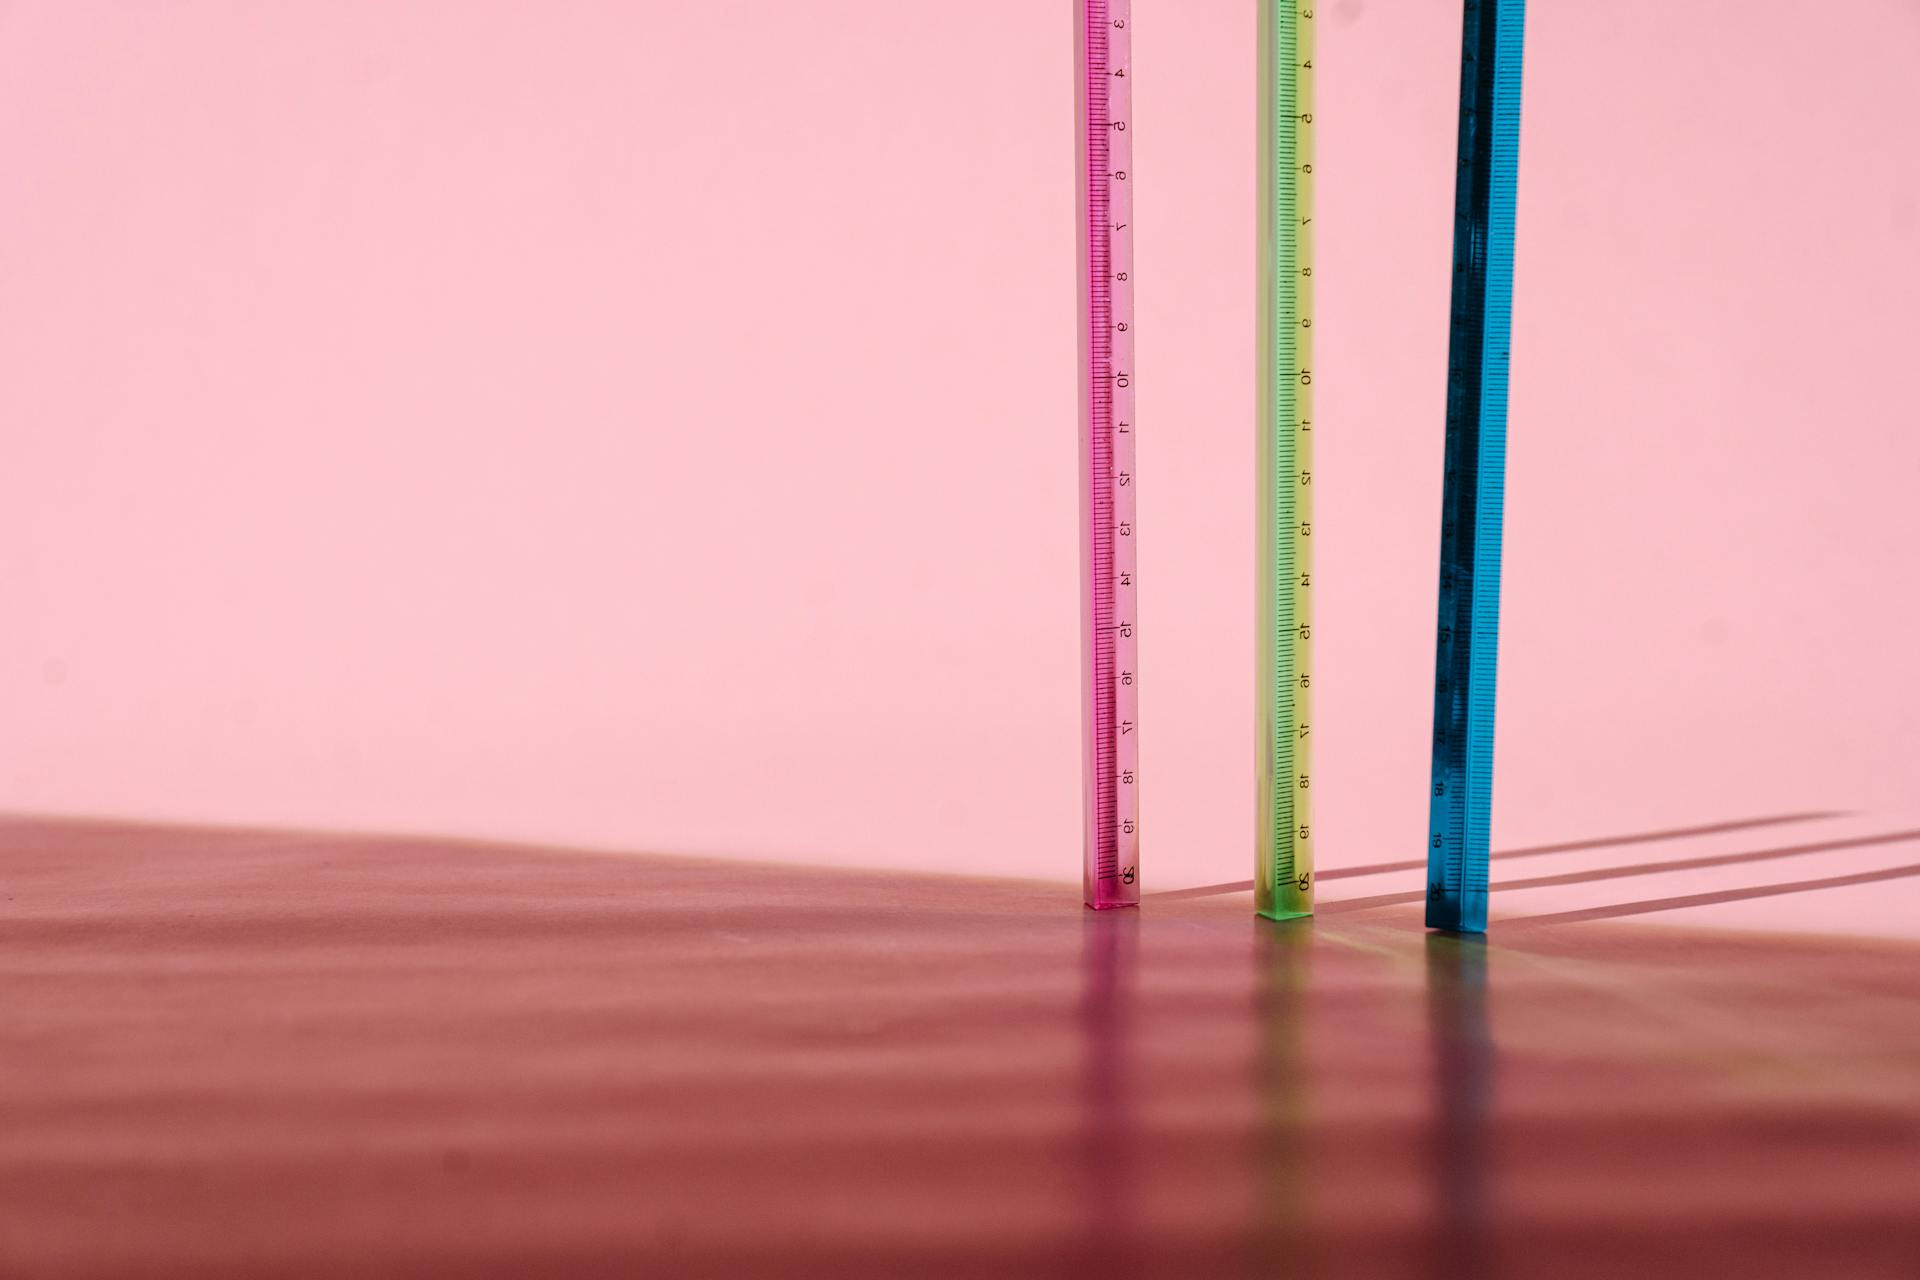 Colorful Rulers use for Measurement